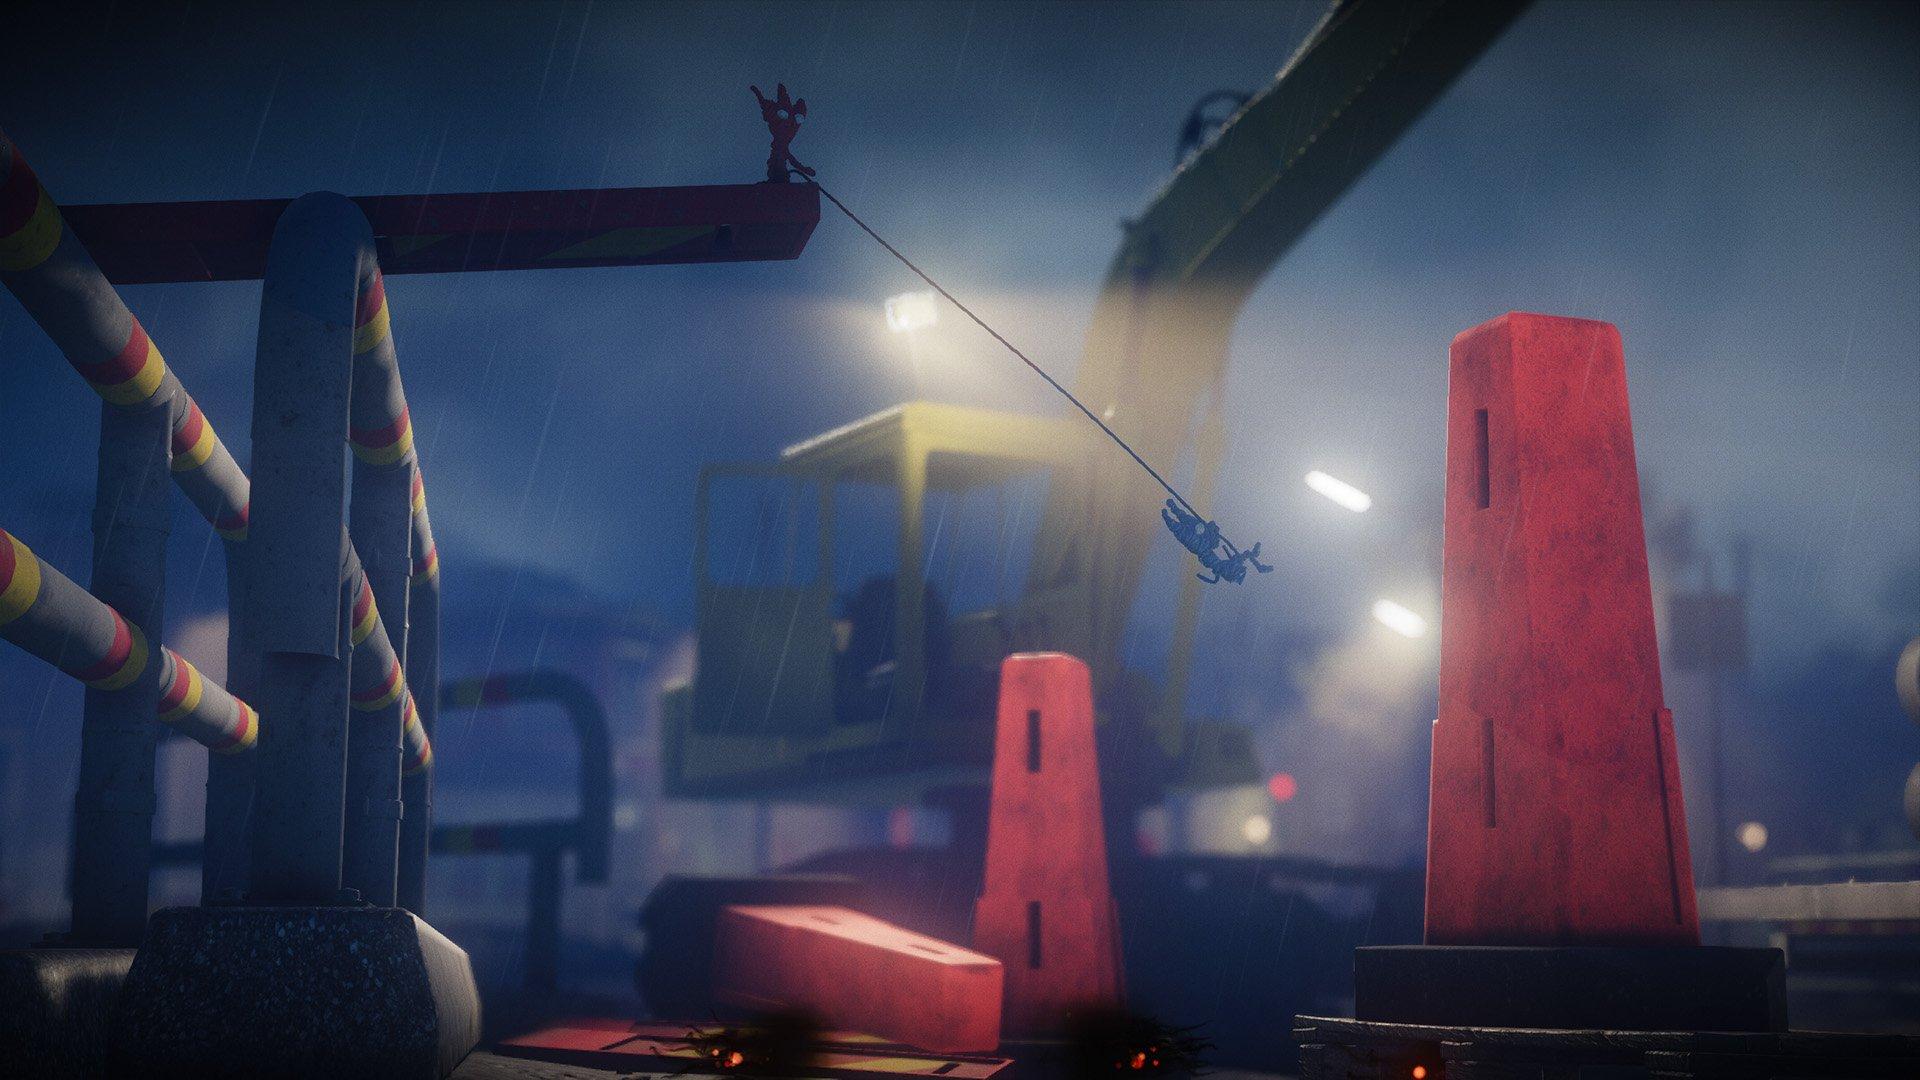 Unravel Two  Couch Co-Op Favorites